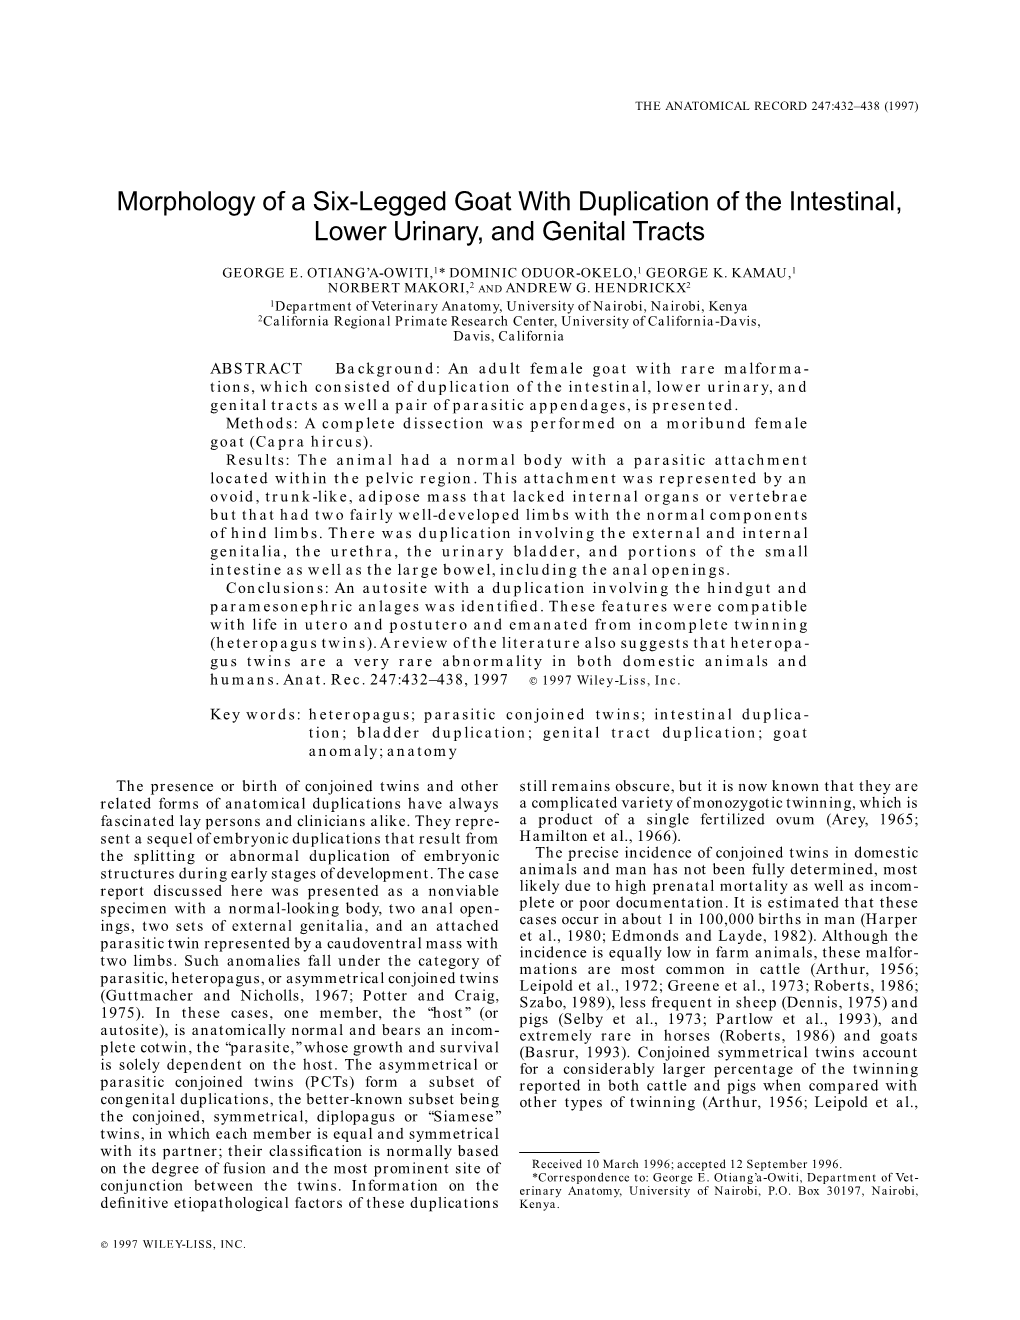 Morphology of a Six-Legged Goat with Duplication of the Intestinal, Lower Urinary, and Genital Tracts